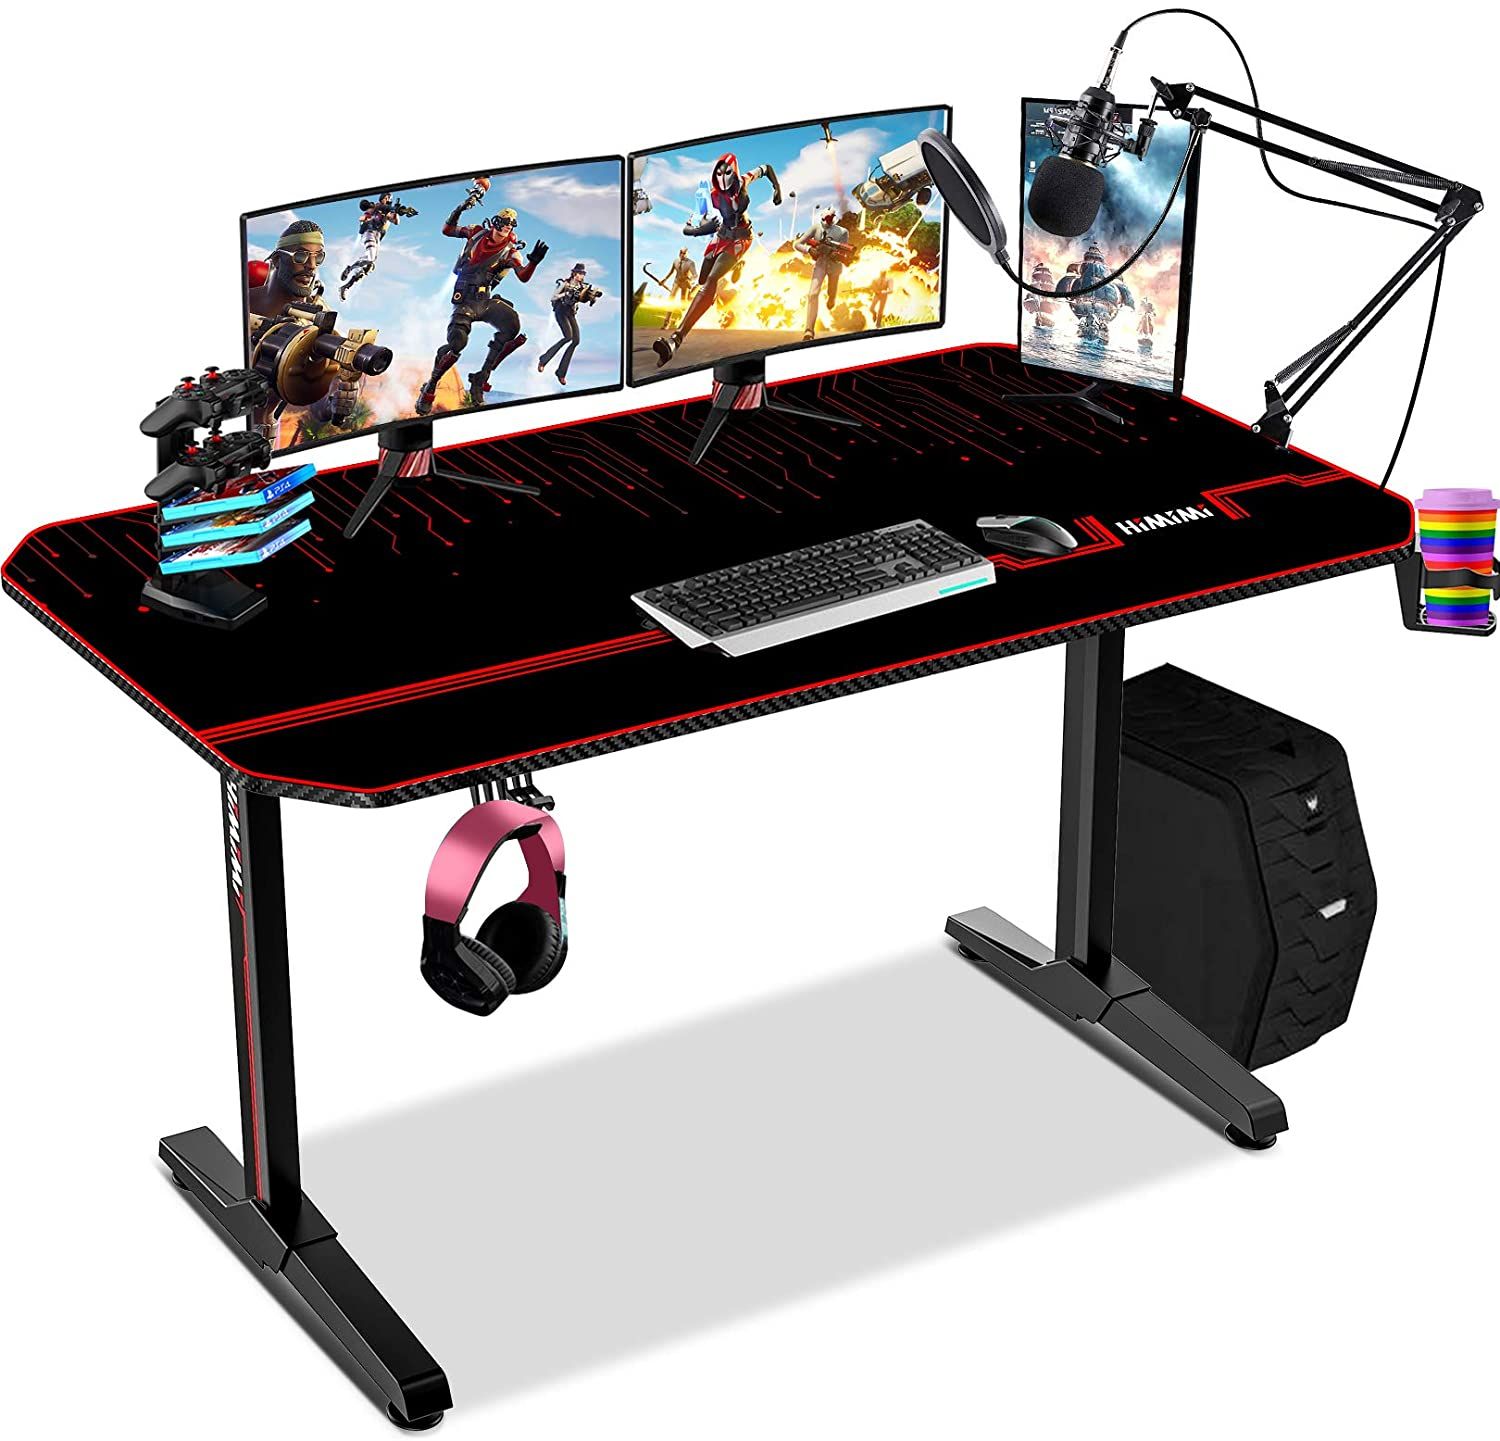 Buy Ergonomic Gaming Desk 55 Inch, T Shaped Computer Table With Free Pertaining To Gaming Desks With Built In Outlets (View 1 of 15)